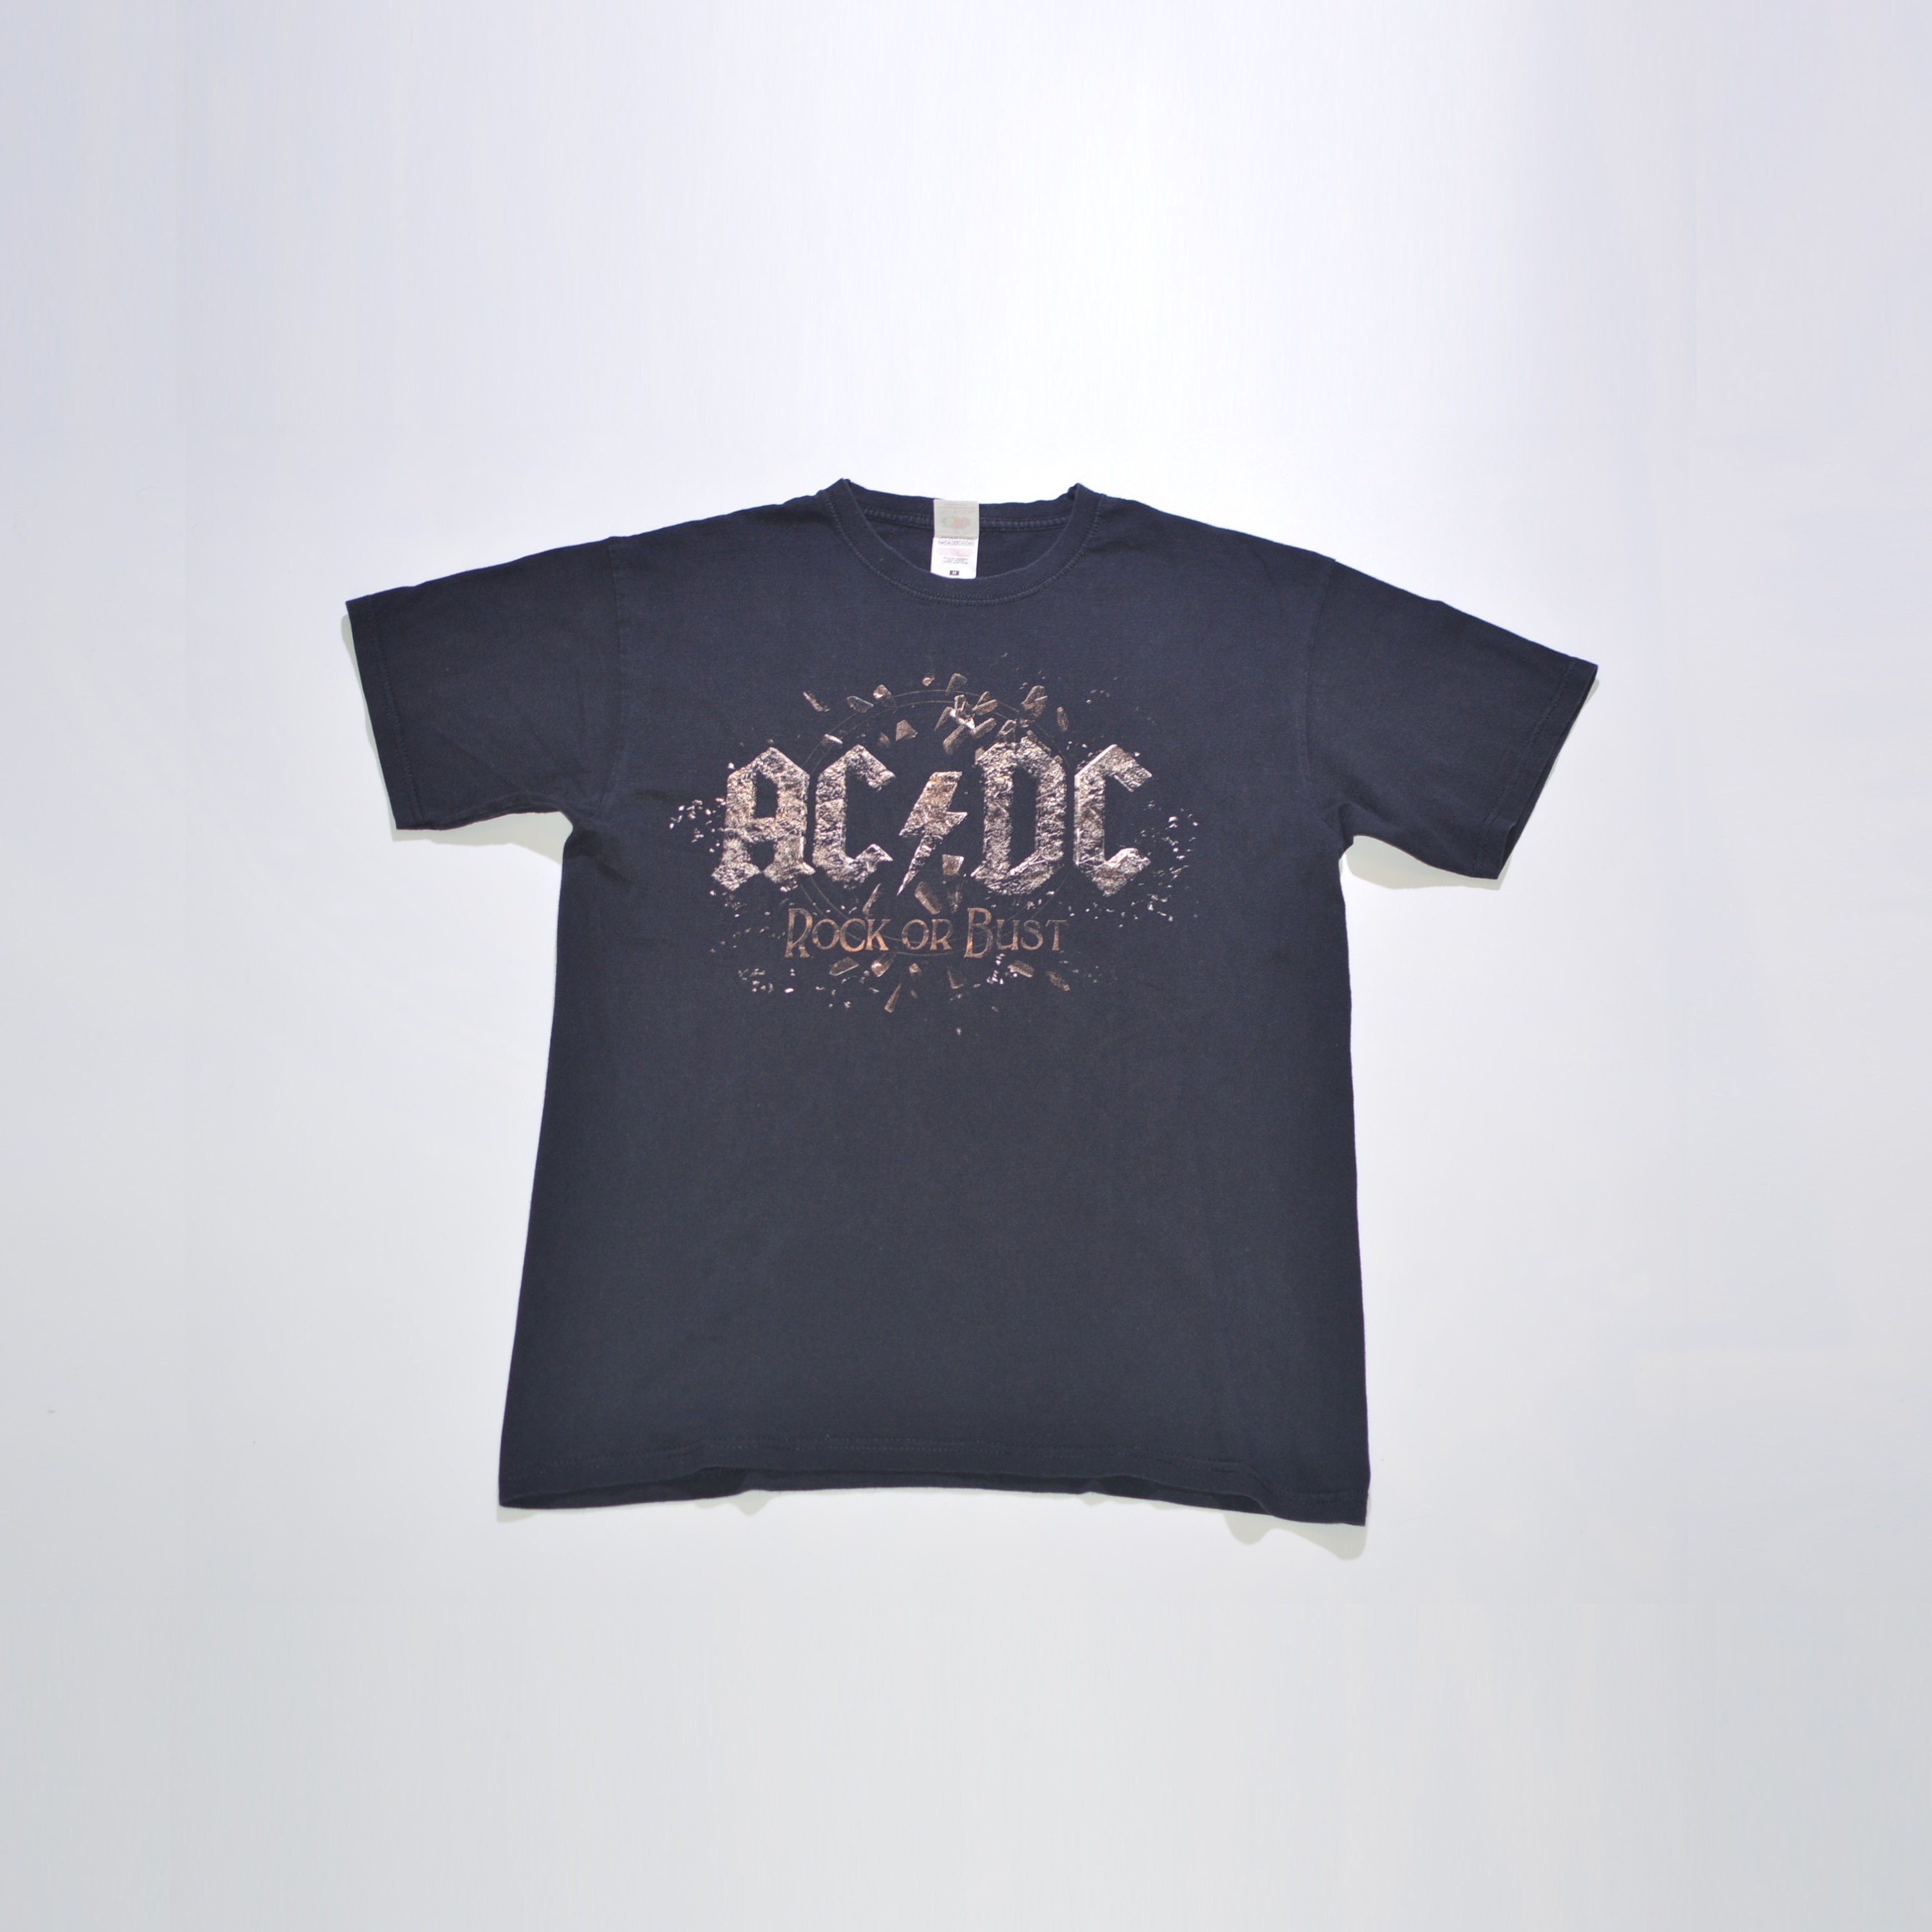 Ambitious Restrict leak Fruit of the Loom AC DC Rock or Bust World Tour 2015 T-shirt - Etsy